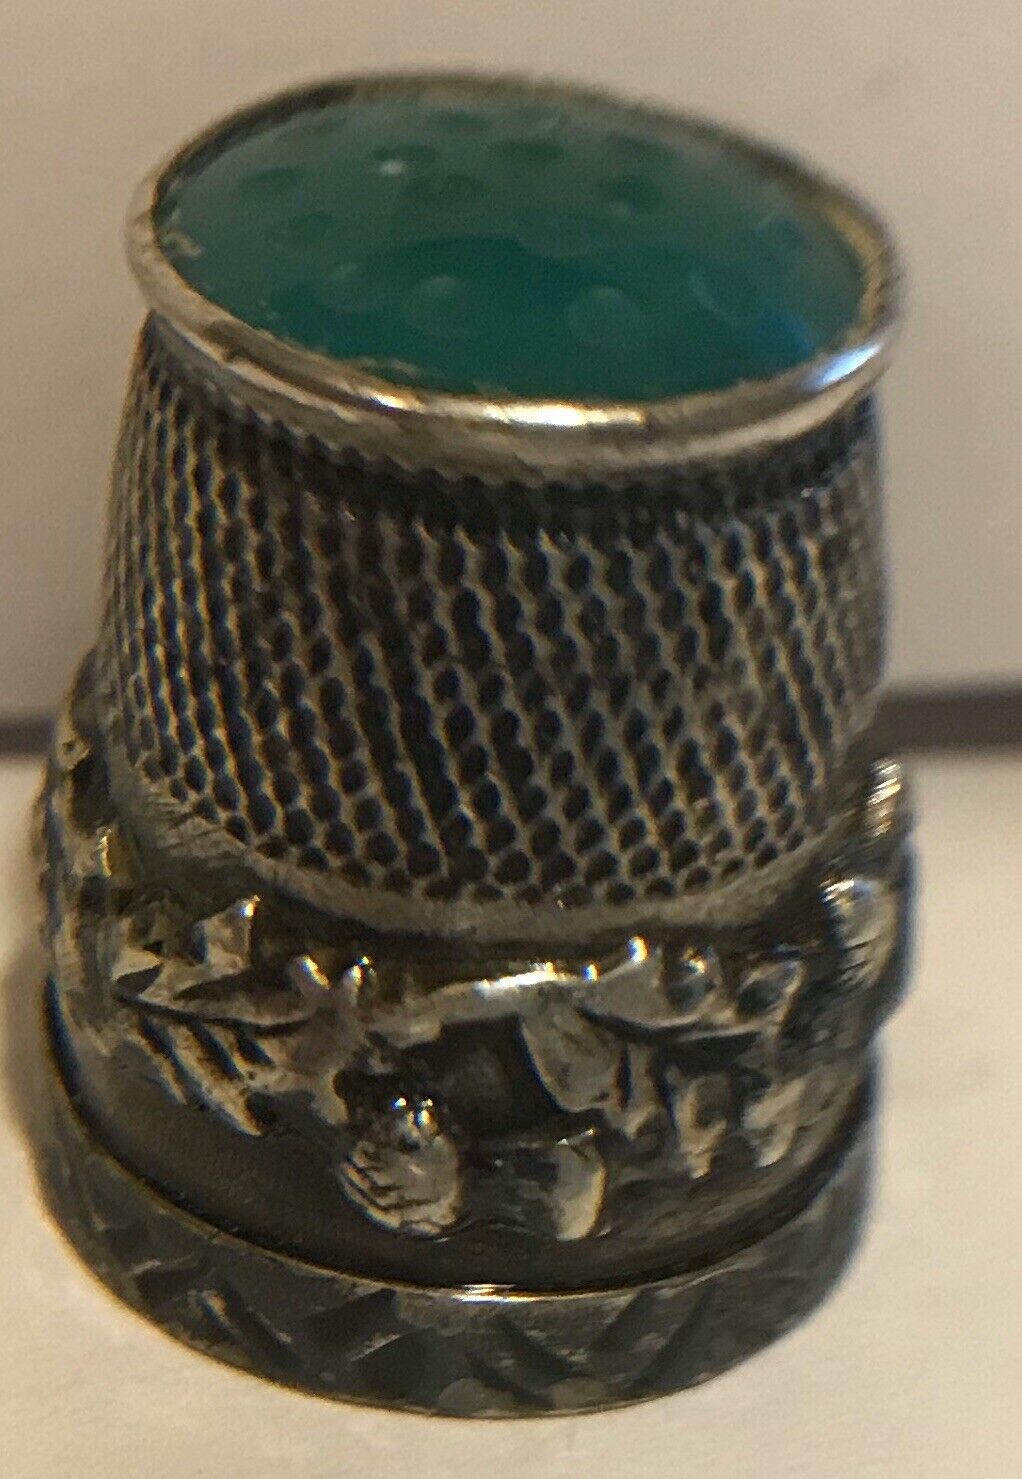 Rare Antique Silver With Jade Gem Top Sewing Finger Thimble Thistle Leaf Acorn?